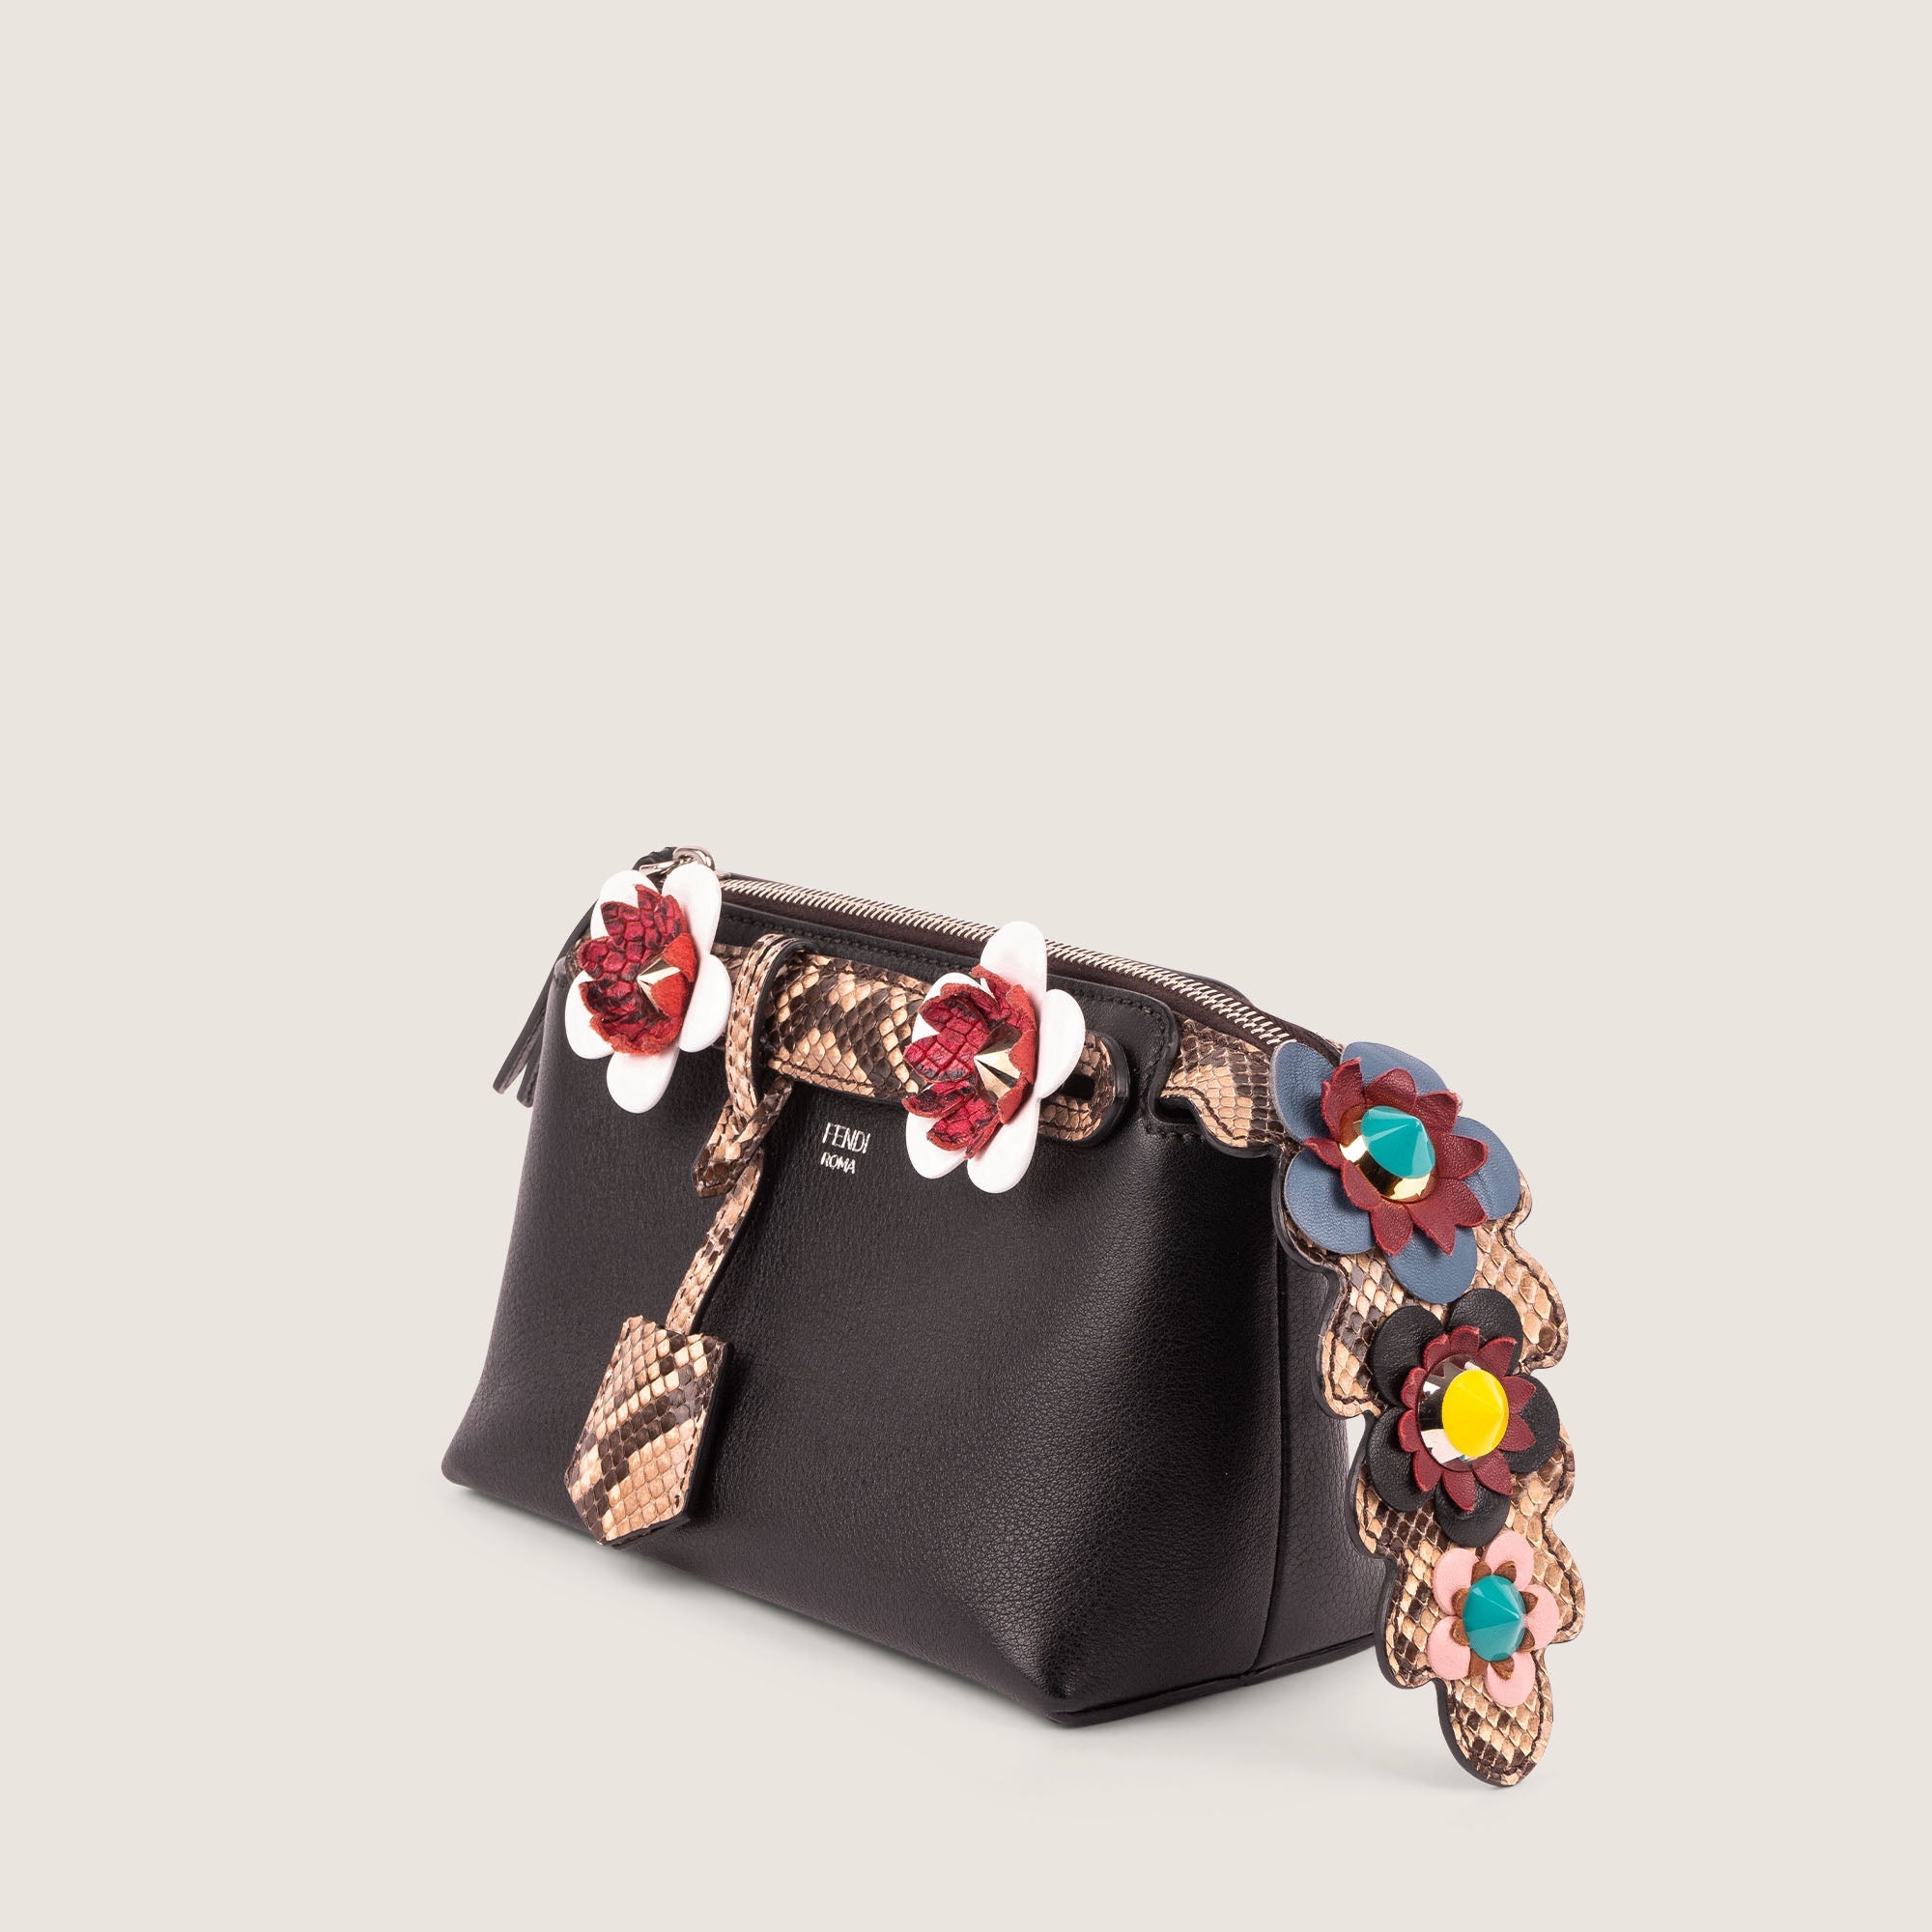 Mini By The Way Bag - FENDI - Affordable Luxury image